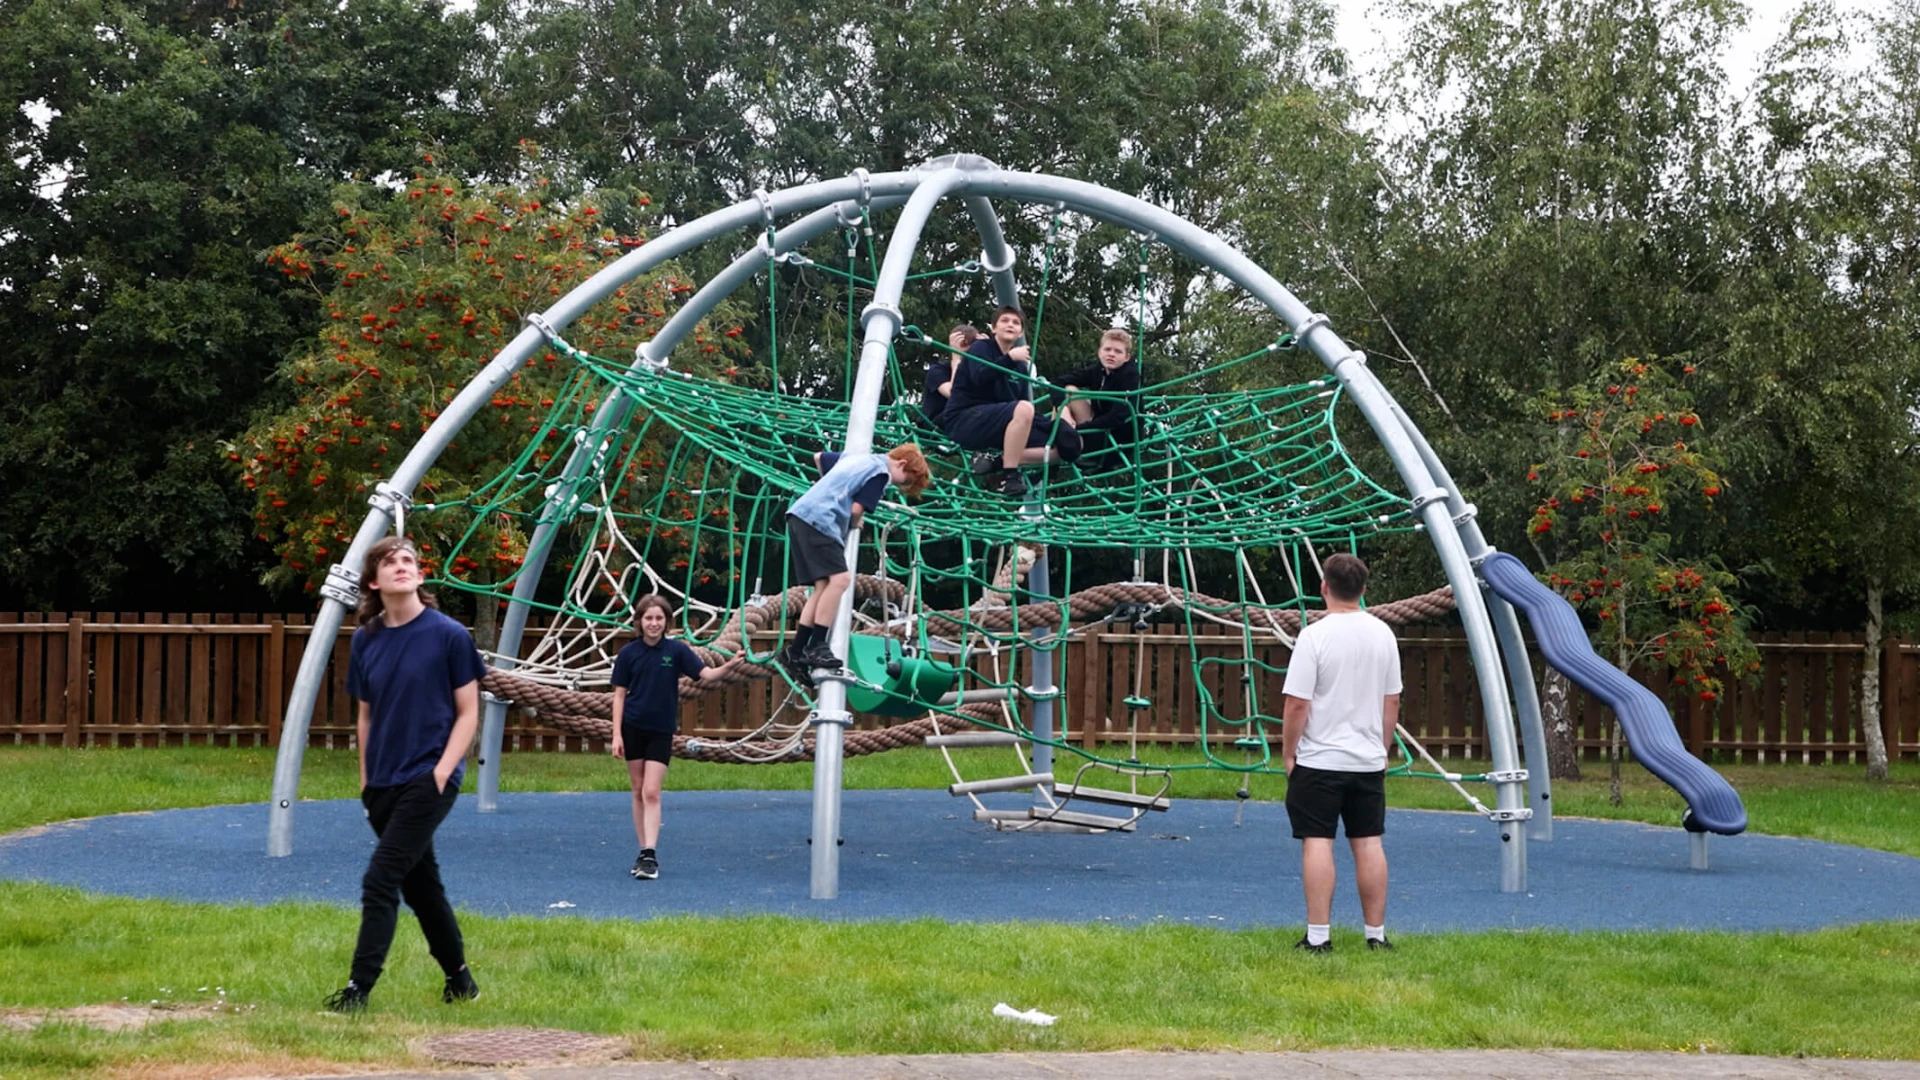 large playground climbing dome at a school playground